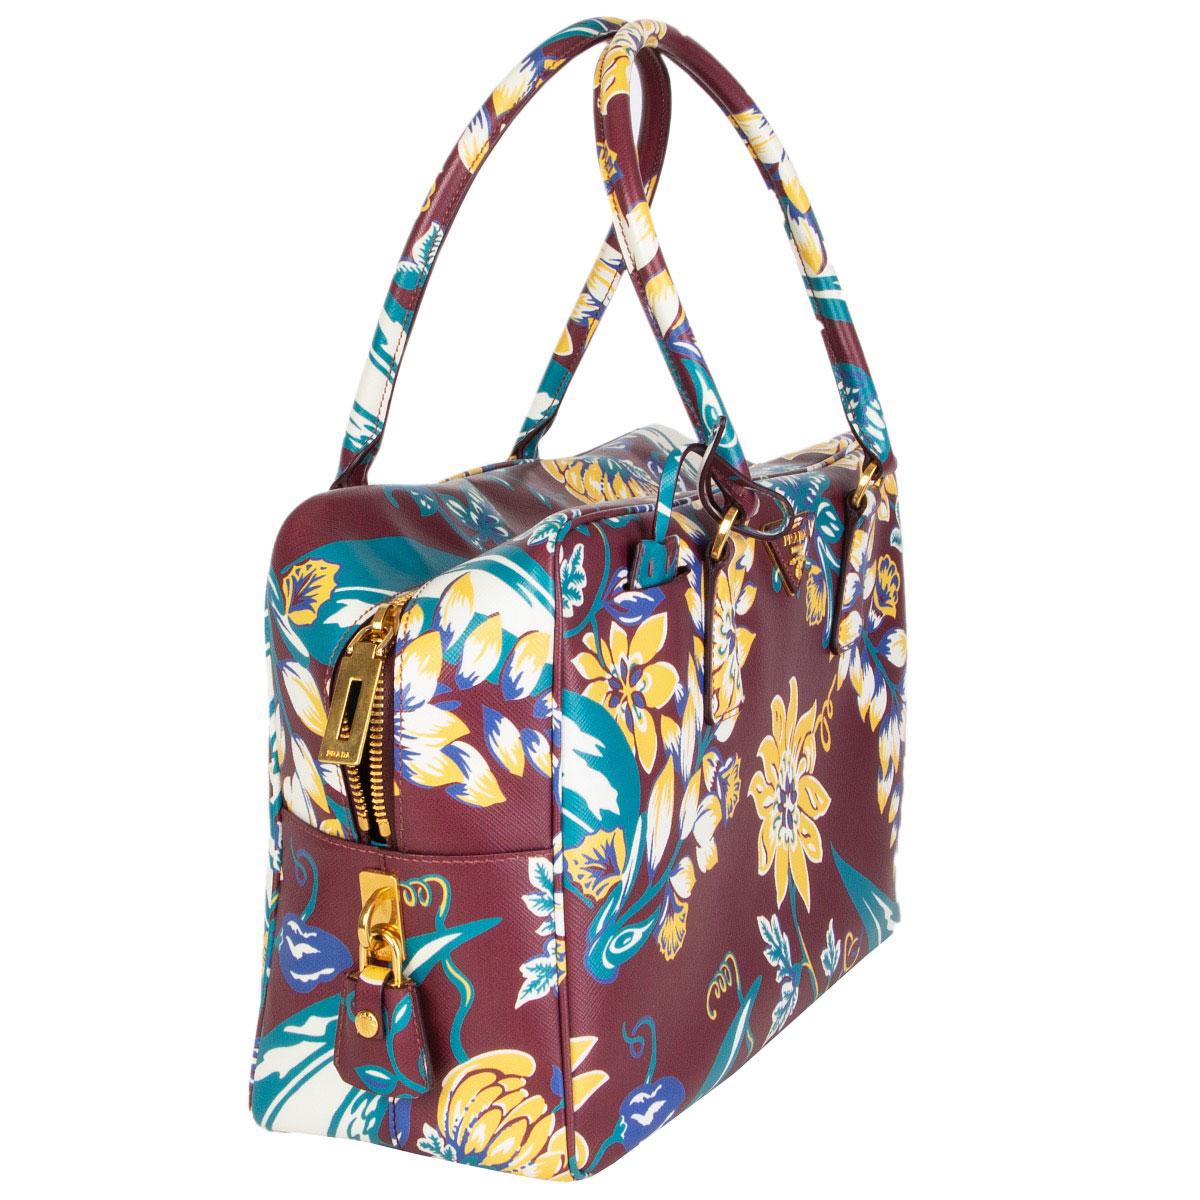 100% authentic Prada flower print Bauletto handbag in burgundy, yellow, white, blue and turquoise Saffiano leather (100%). Closes with a zipper on top and is lined in turquoise calfskin leather (100%) with some profiles in flower print Saffiano